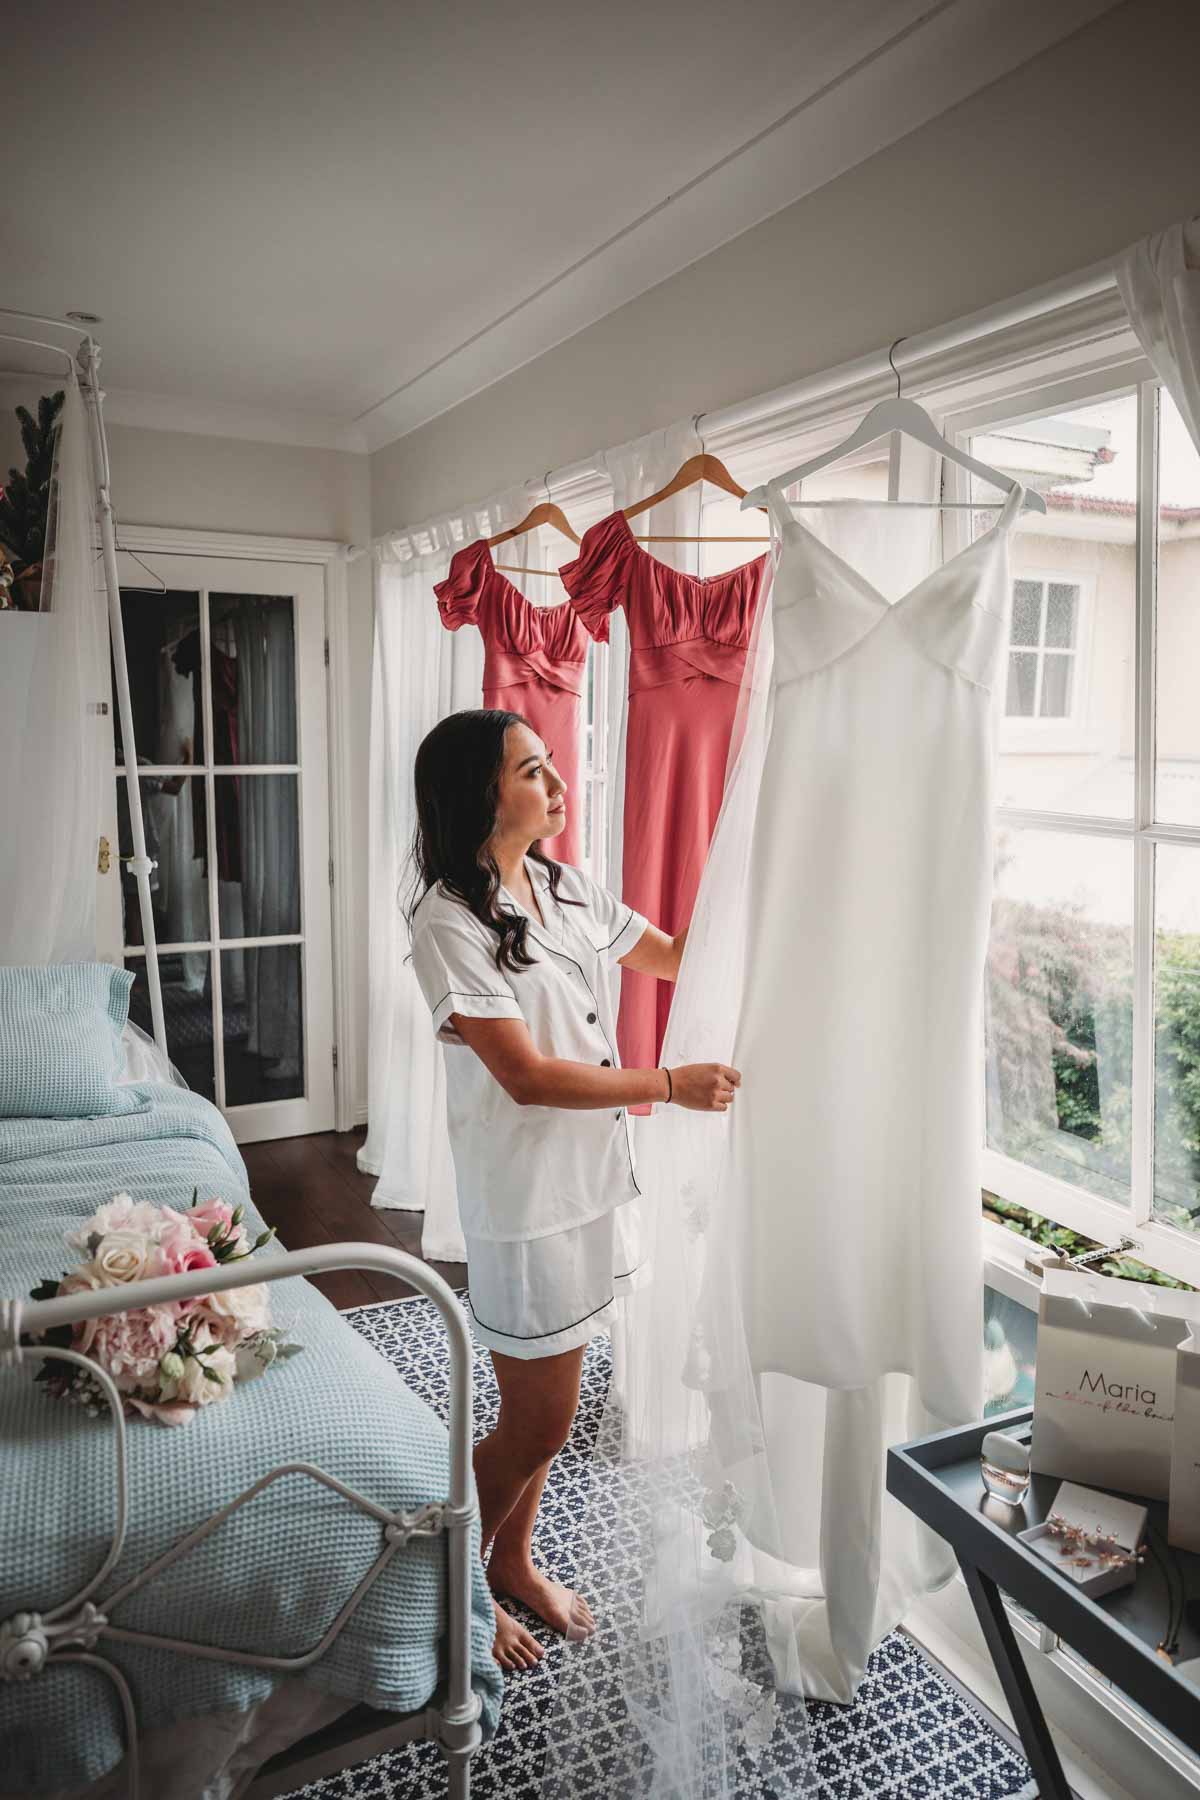 A bride preparing her wedding dress before the ceremony